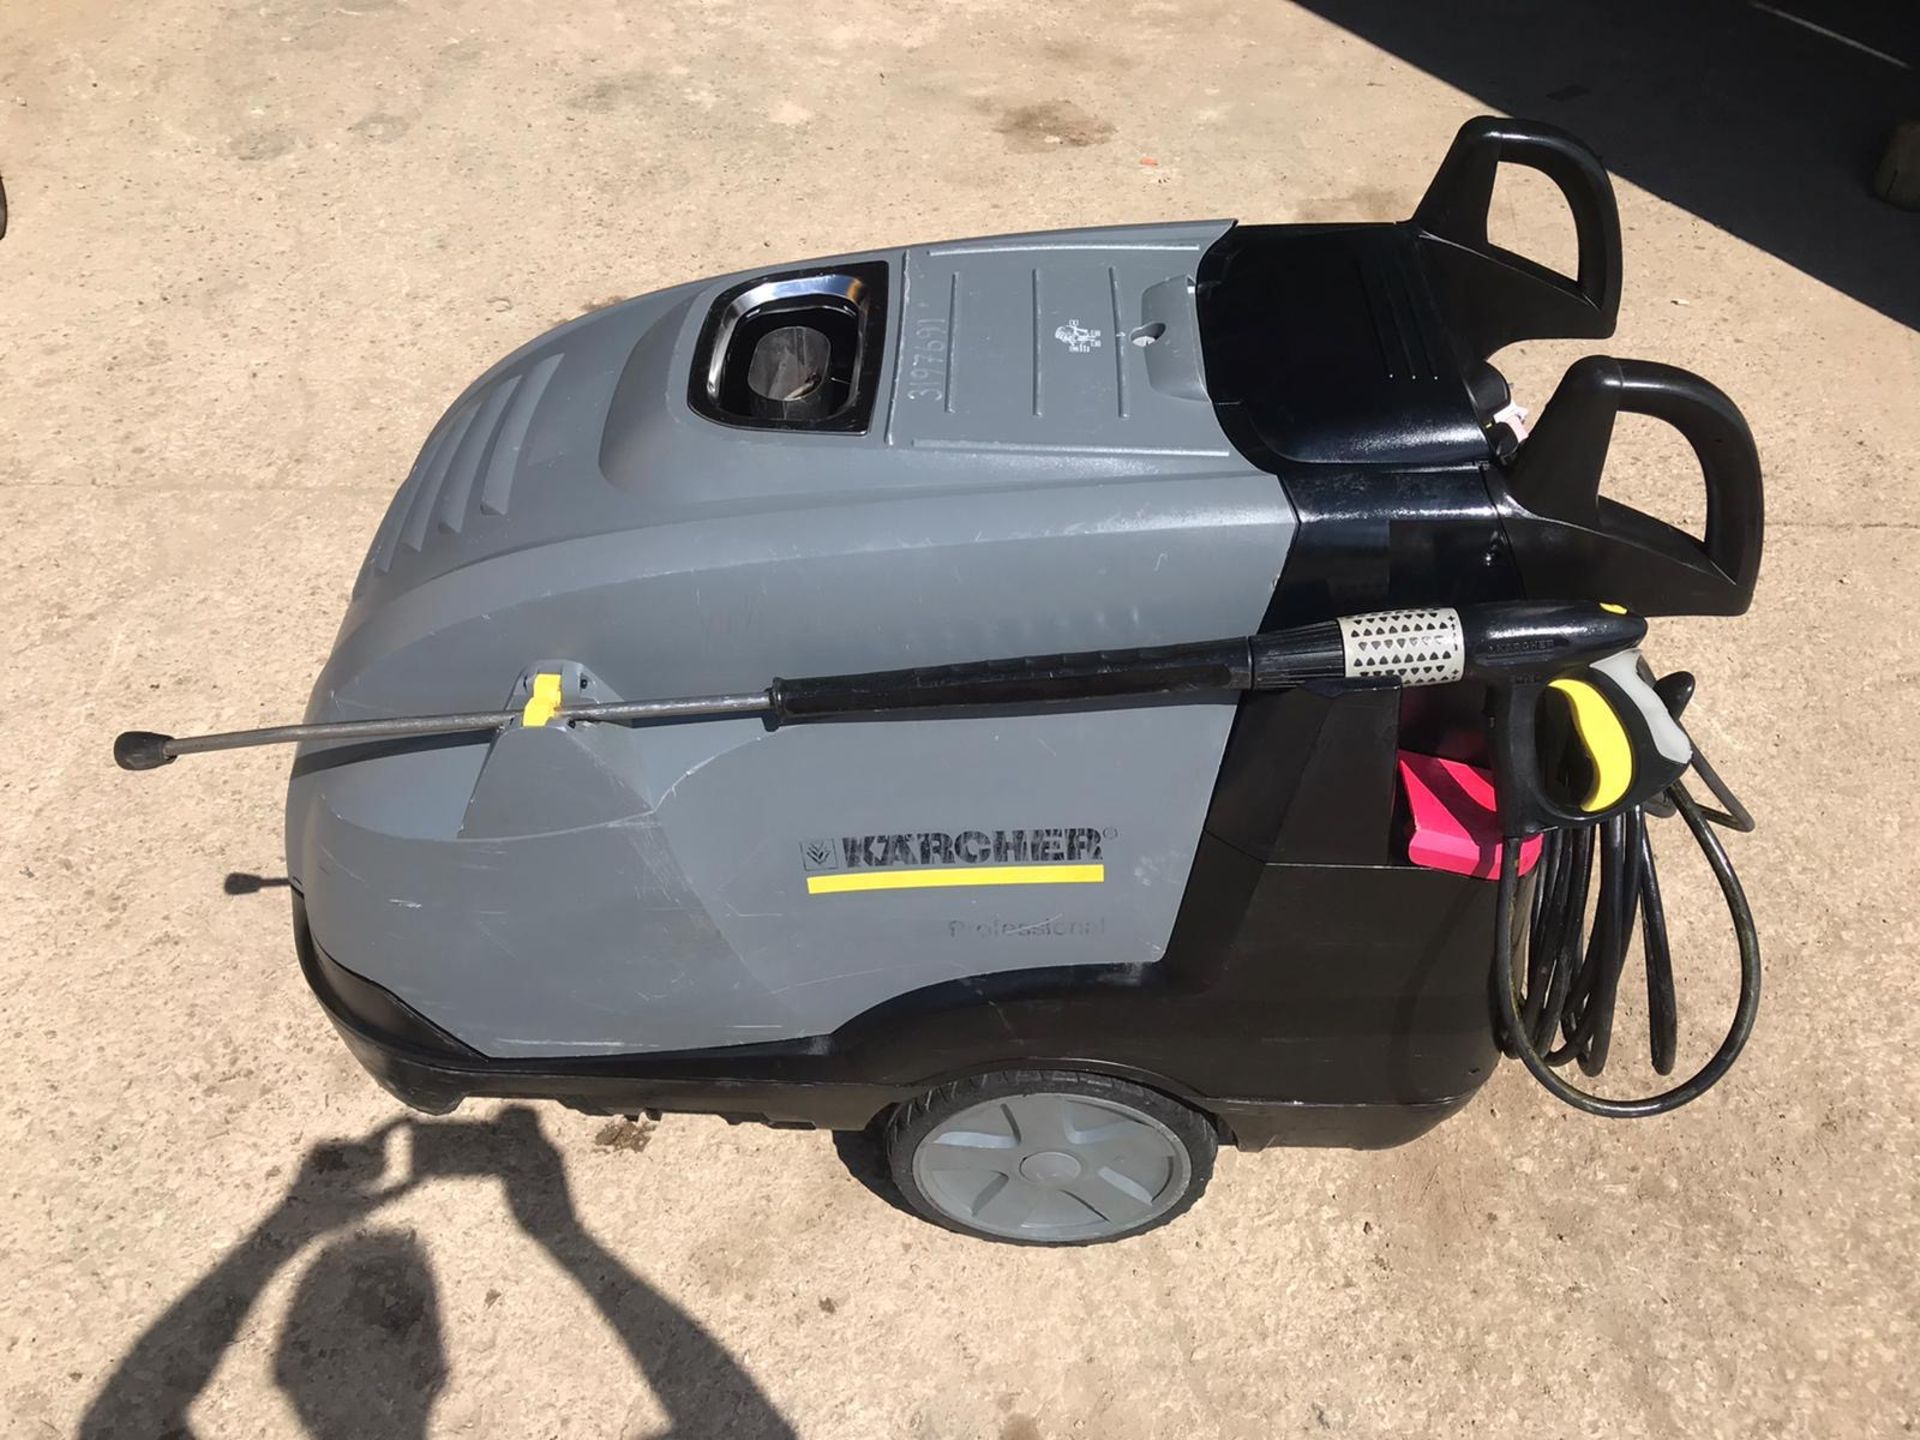 KARCHER 7/9 - 4M PROFESSIONAL 110V HIGH PRESSURE WASHER, YEAR 2014, HOT & COLD STEAM CLEANER - Image 3 of 11